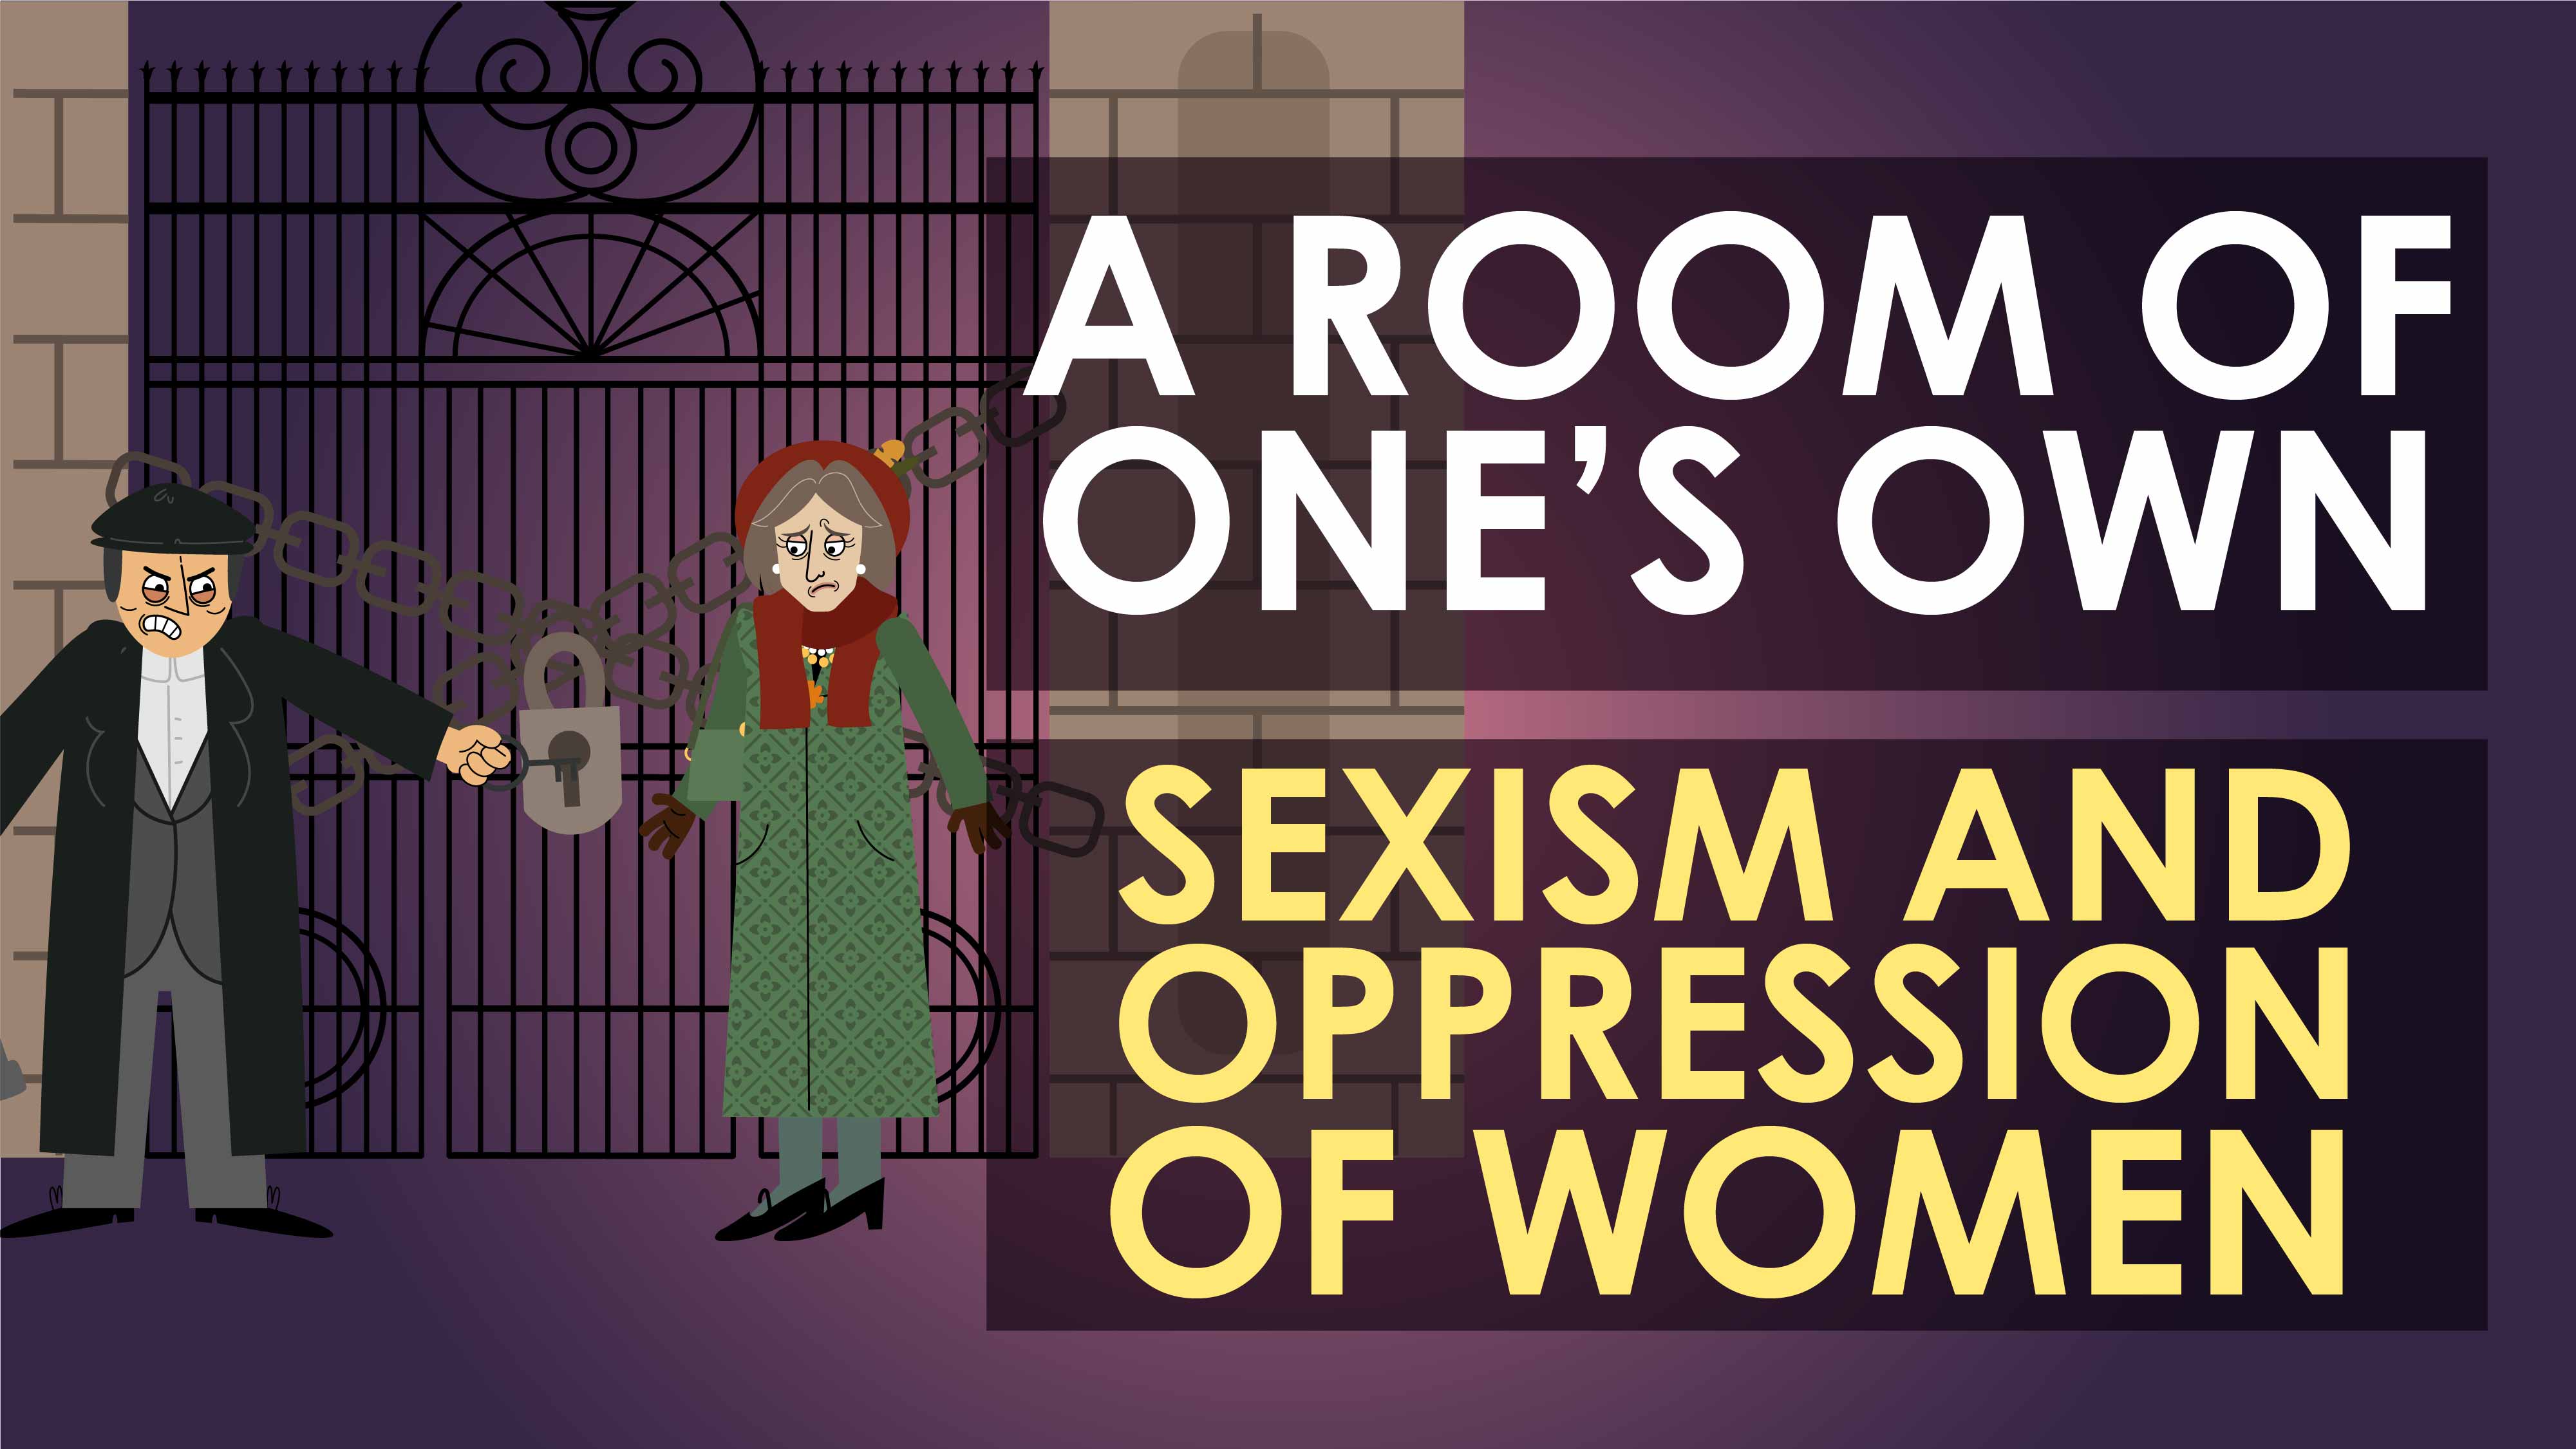 A Room of One's Own - Sexism and Oppression of Women - Nailing Non-Fiction Series